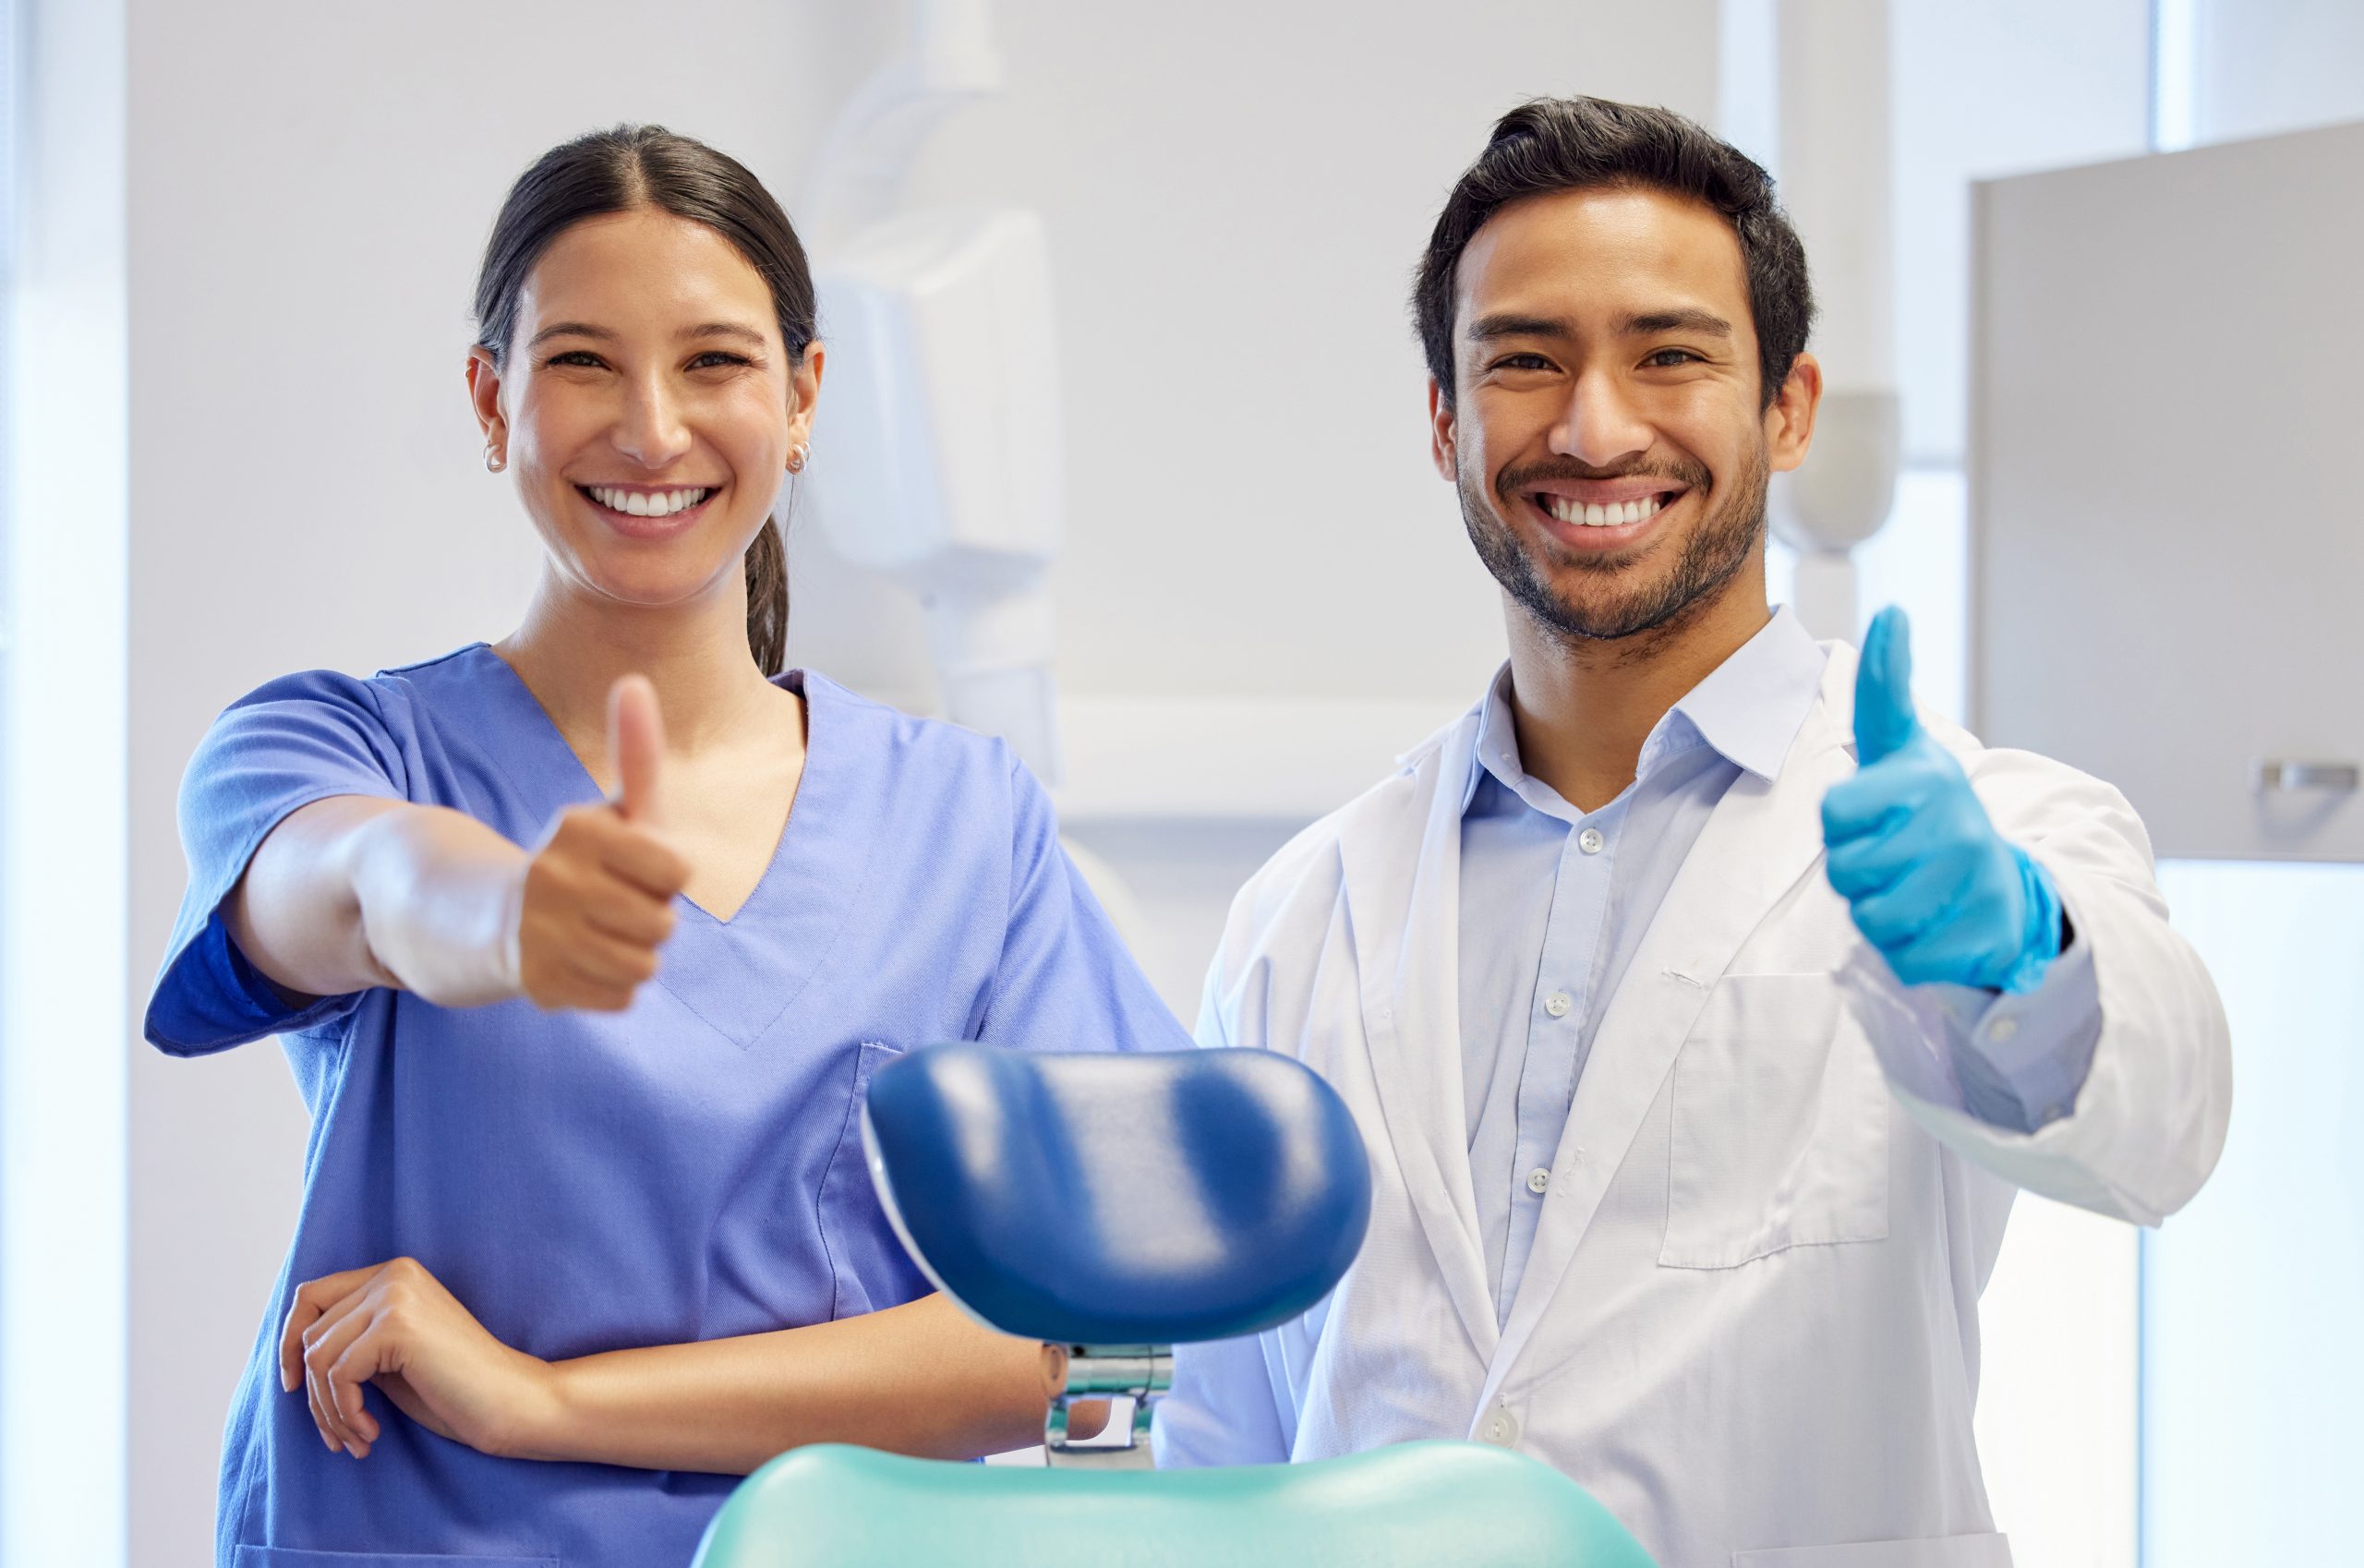 Dentist and Hygienist working together as a team